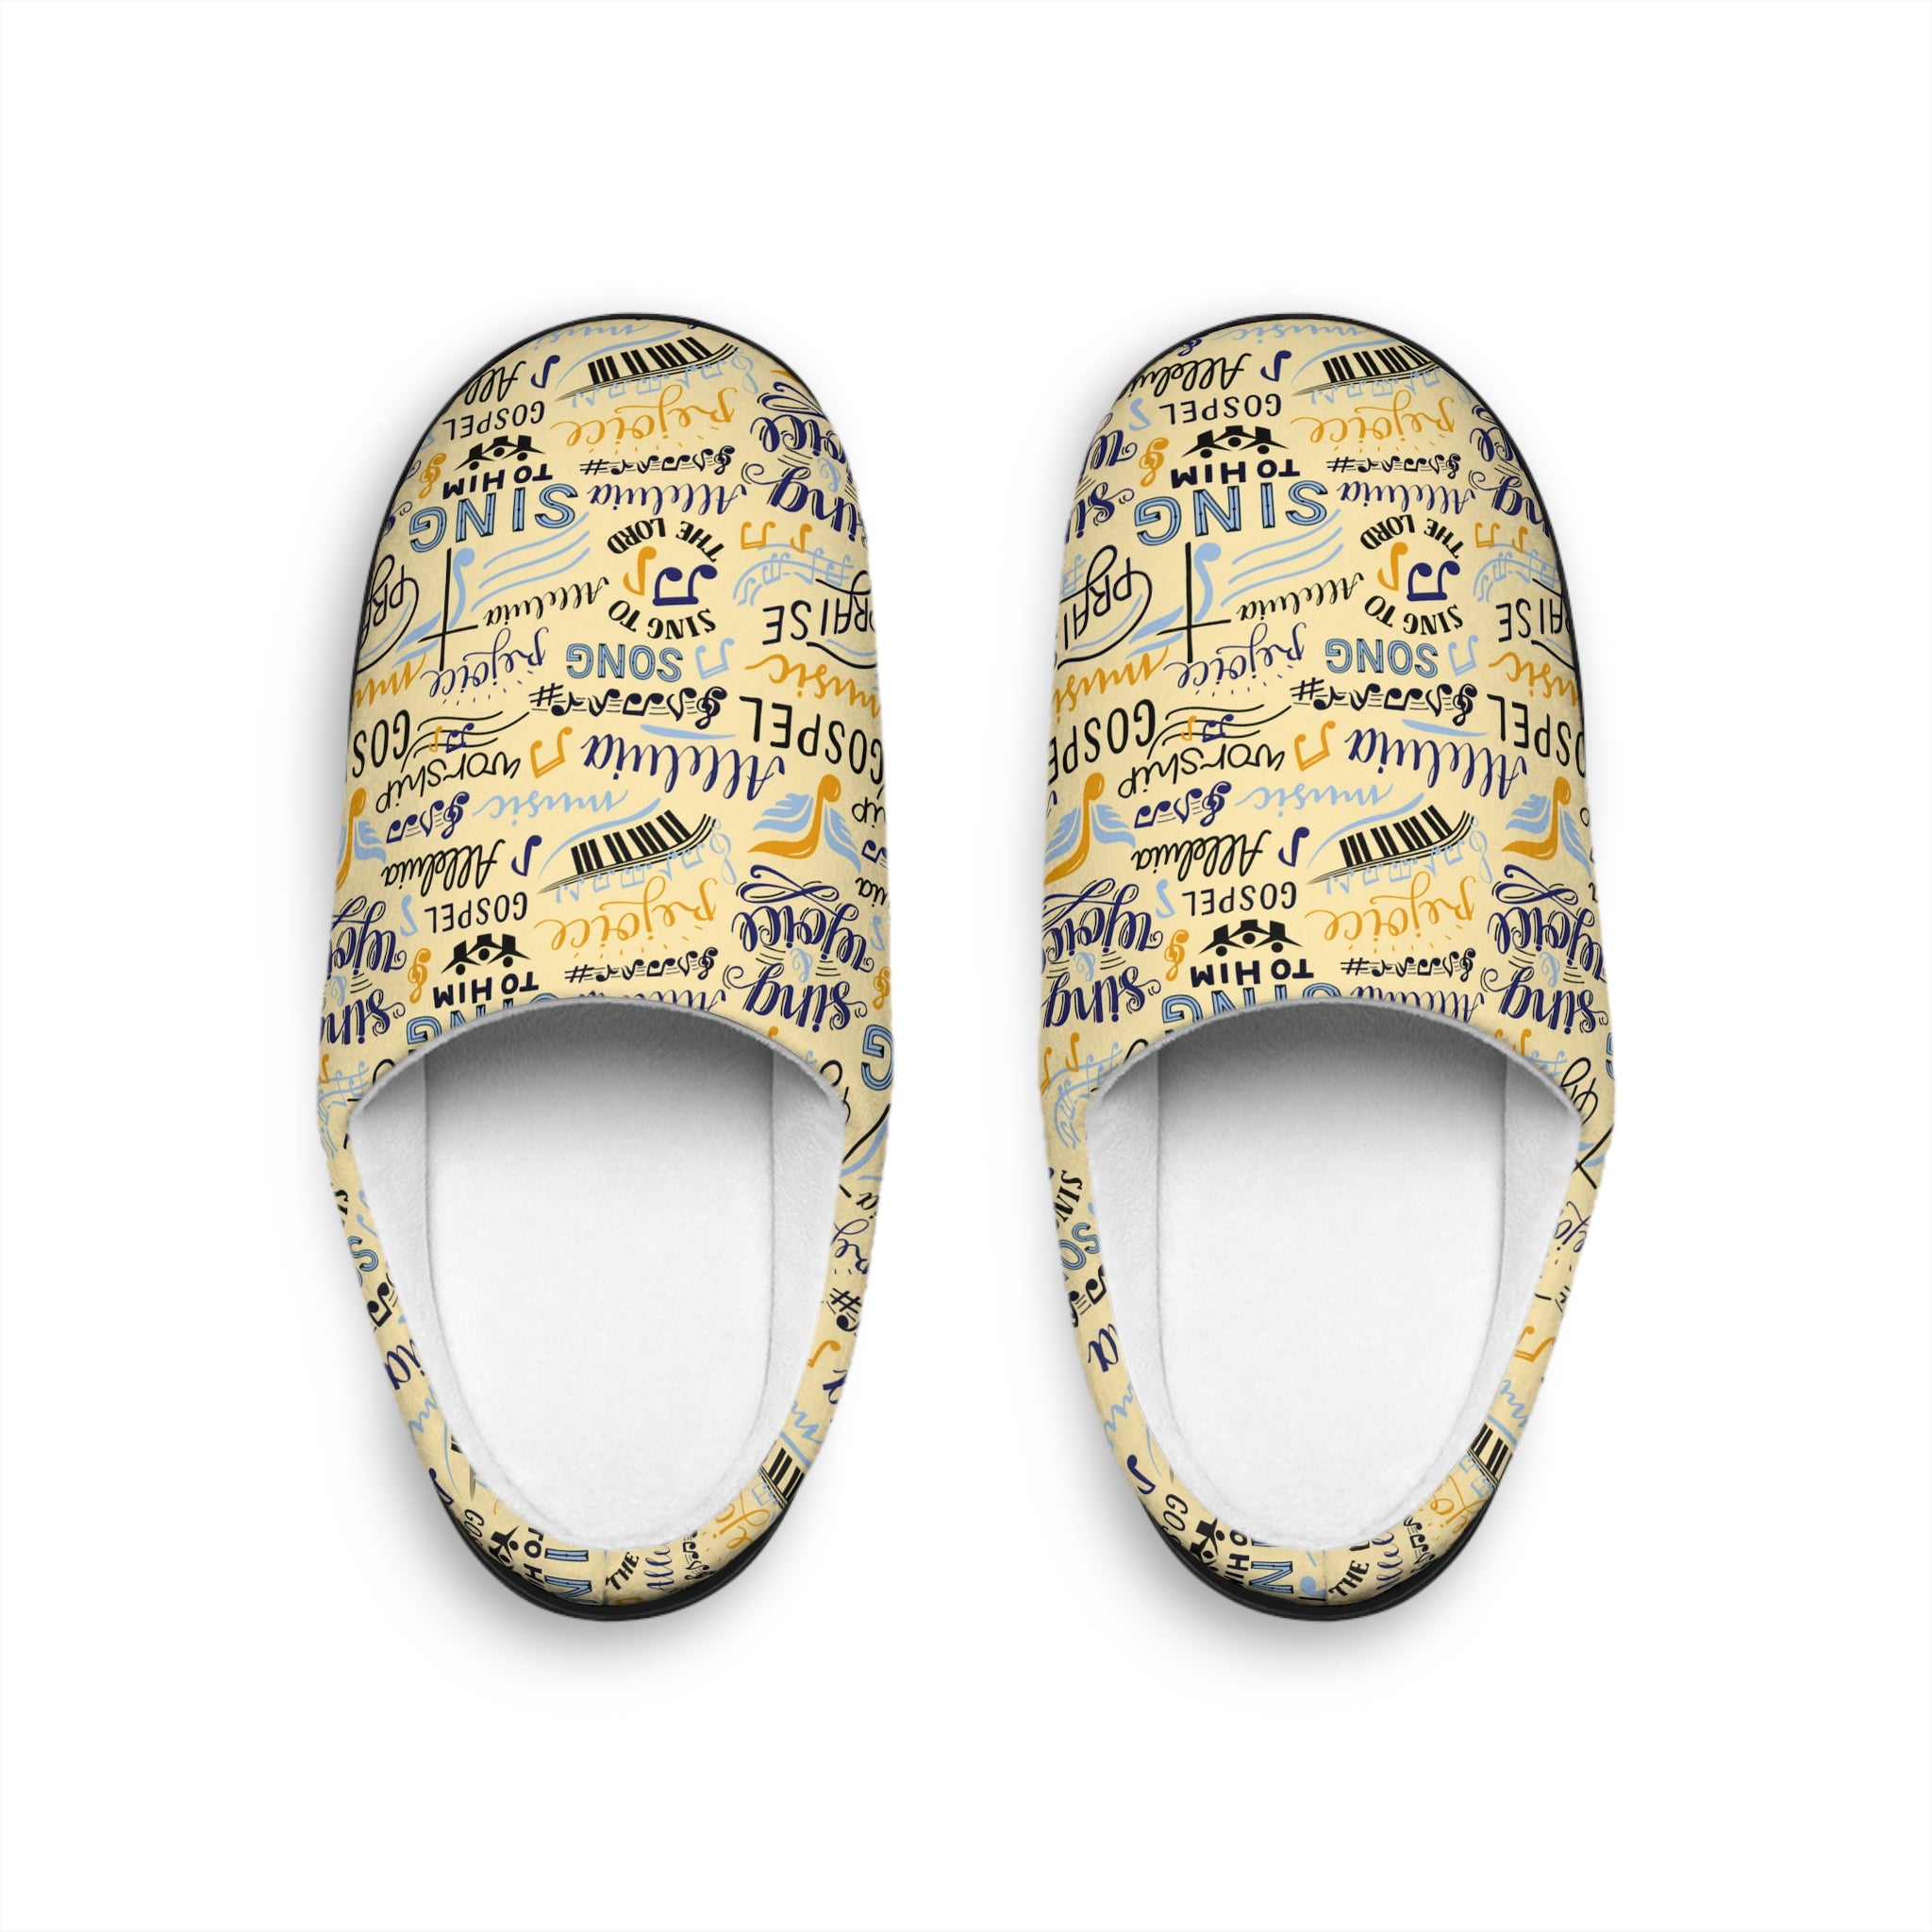 Sing To Him Alleluia Women's Yellow Indoor Slippers - Matching Pajama Set and Lounge / Pajama Pants Available Size: US 7 - 8 Color: Black sole Jesus Passion Apparel